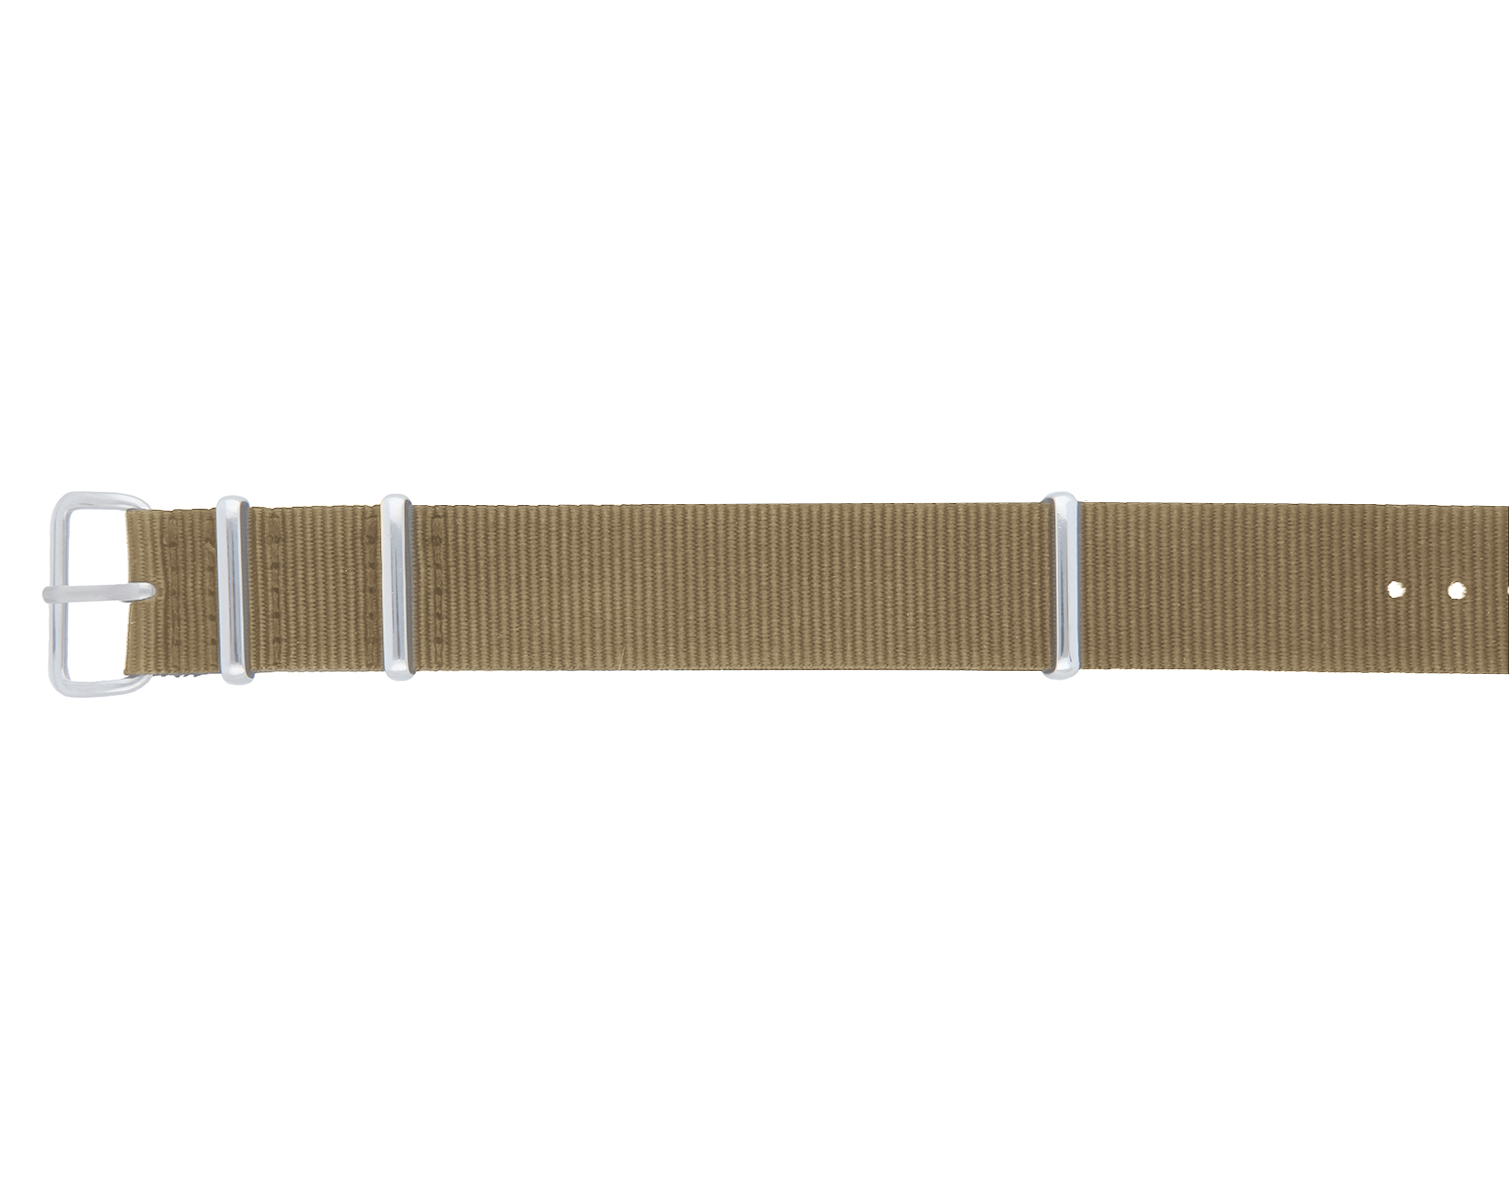 Close up on part of a khaki coloured fabric strap for the wrist with fastenings